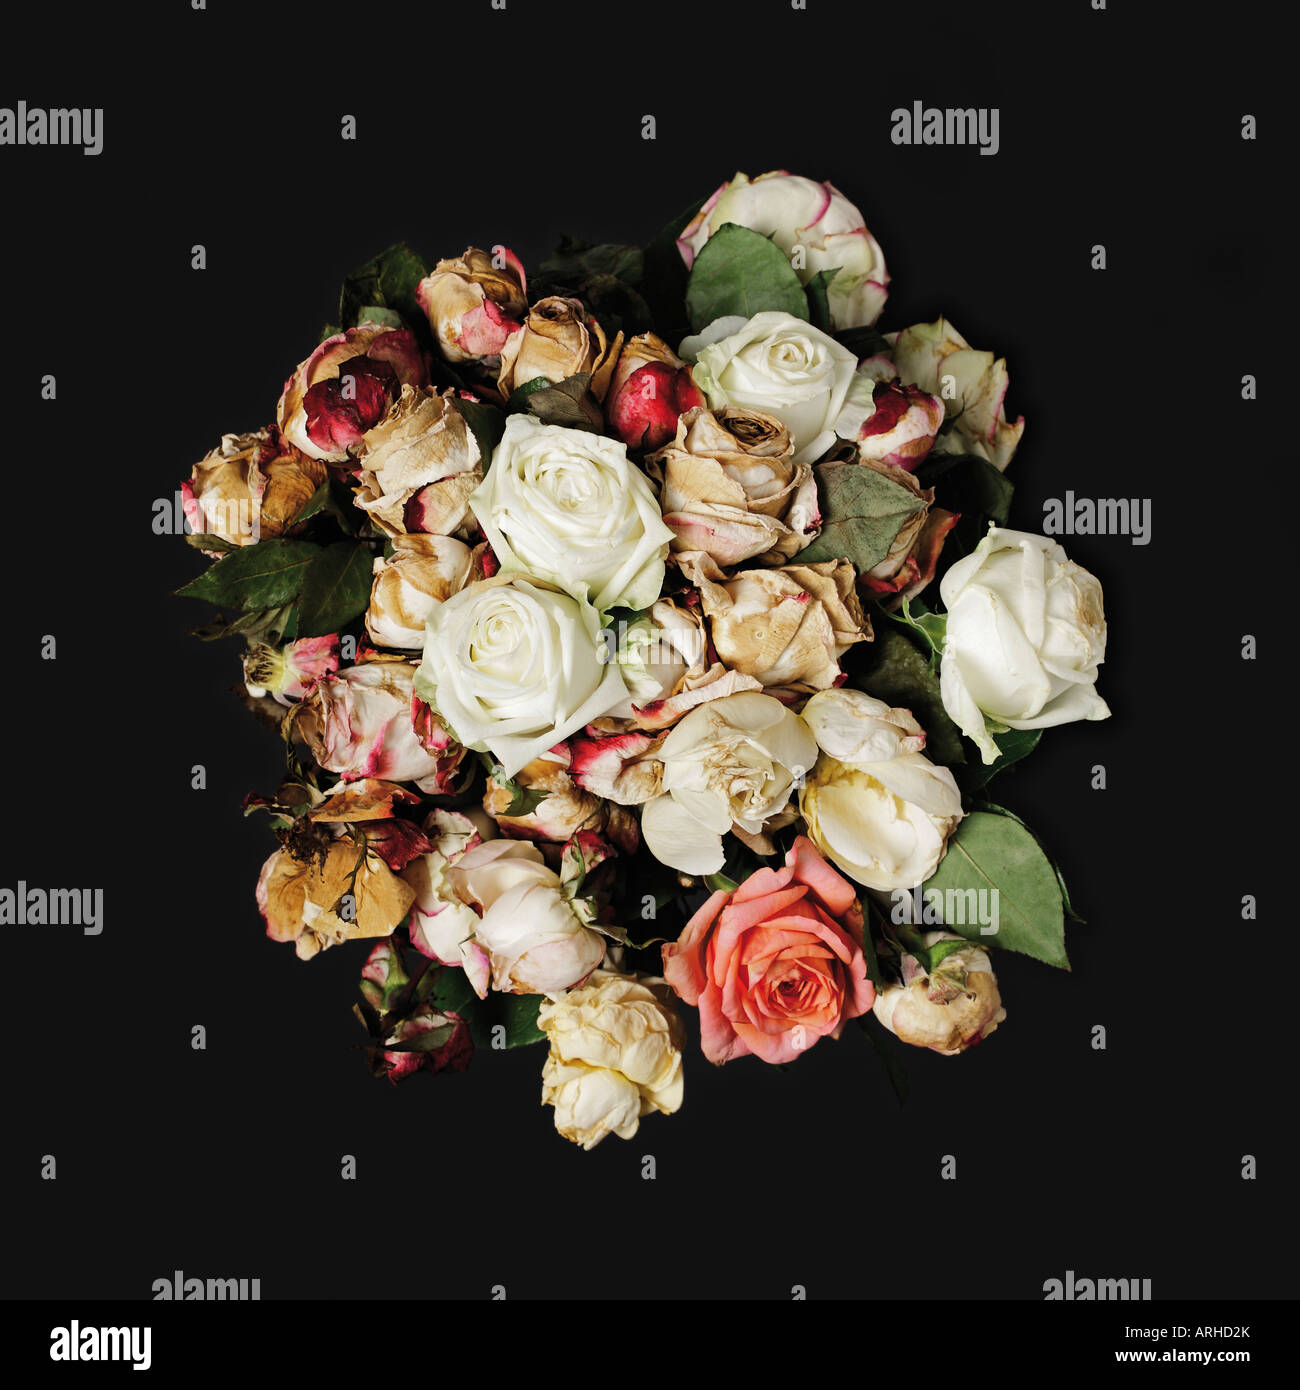 Bunch of wilted roses on black background Stock Photo